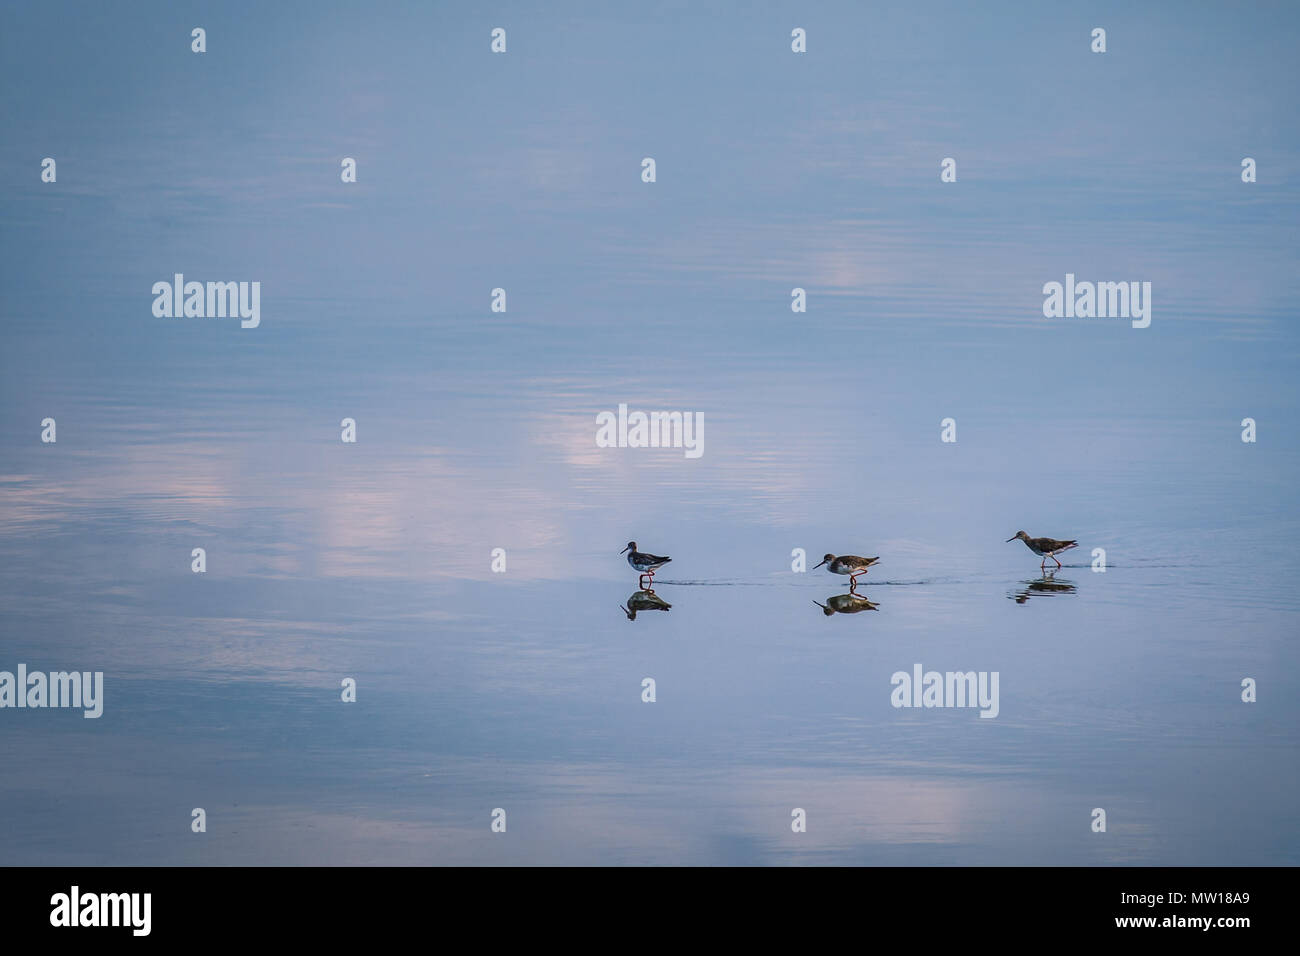 3 Stilt shorebirds walking in a line in the shallow calm reflective tidal sea waters. Stock Photo